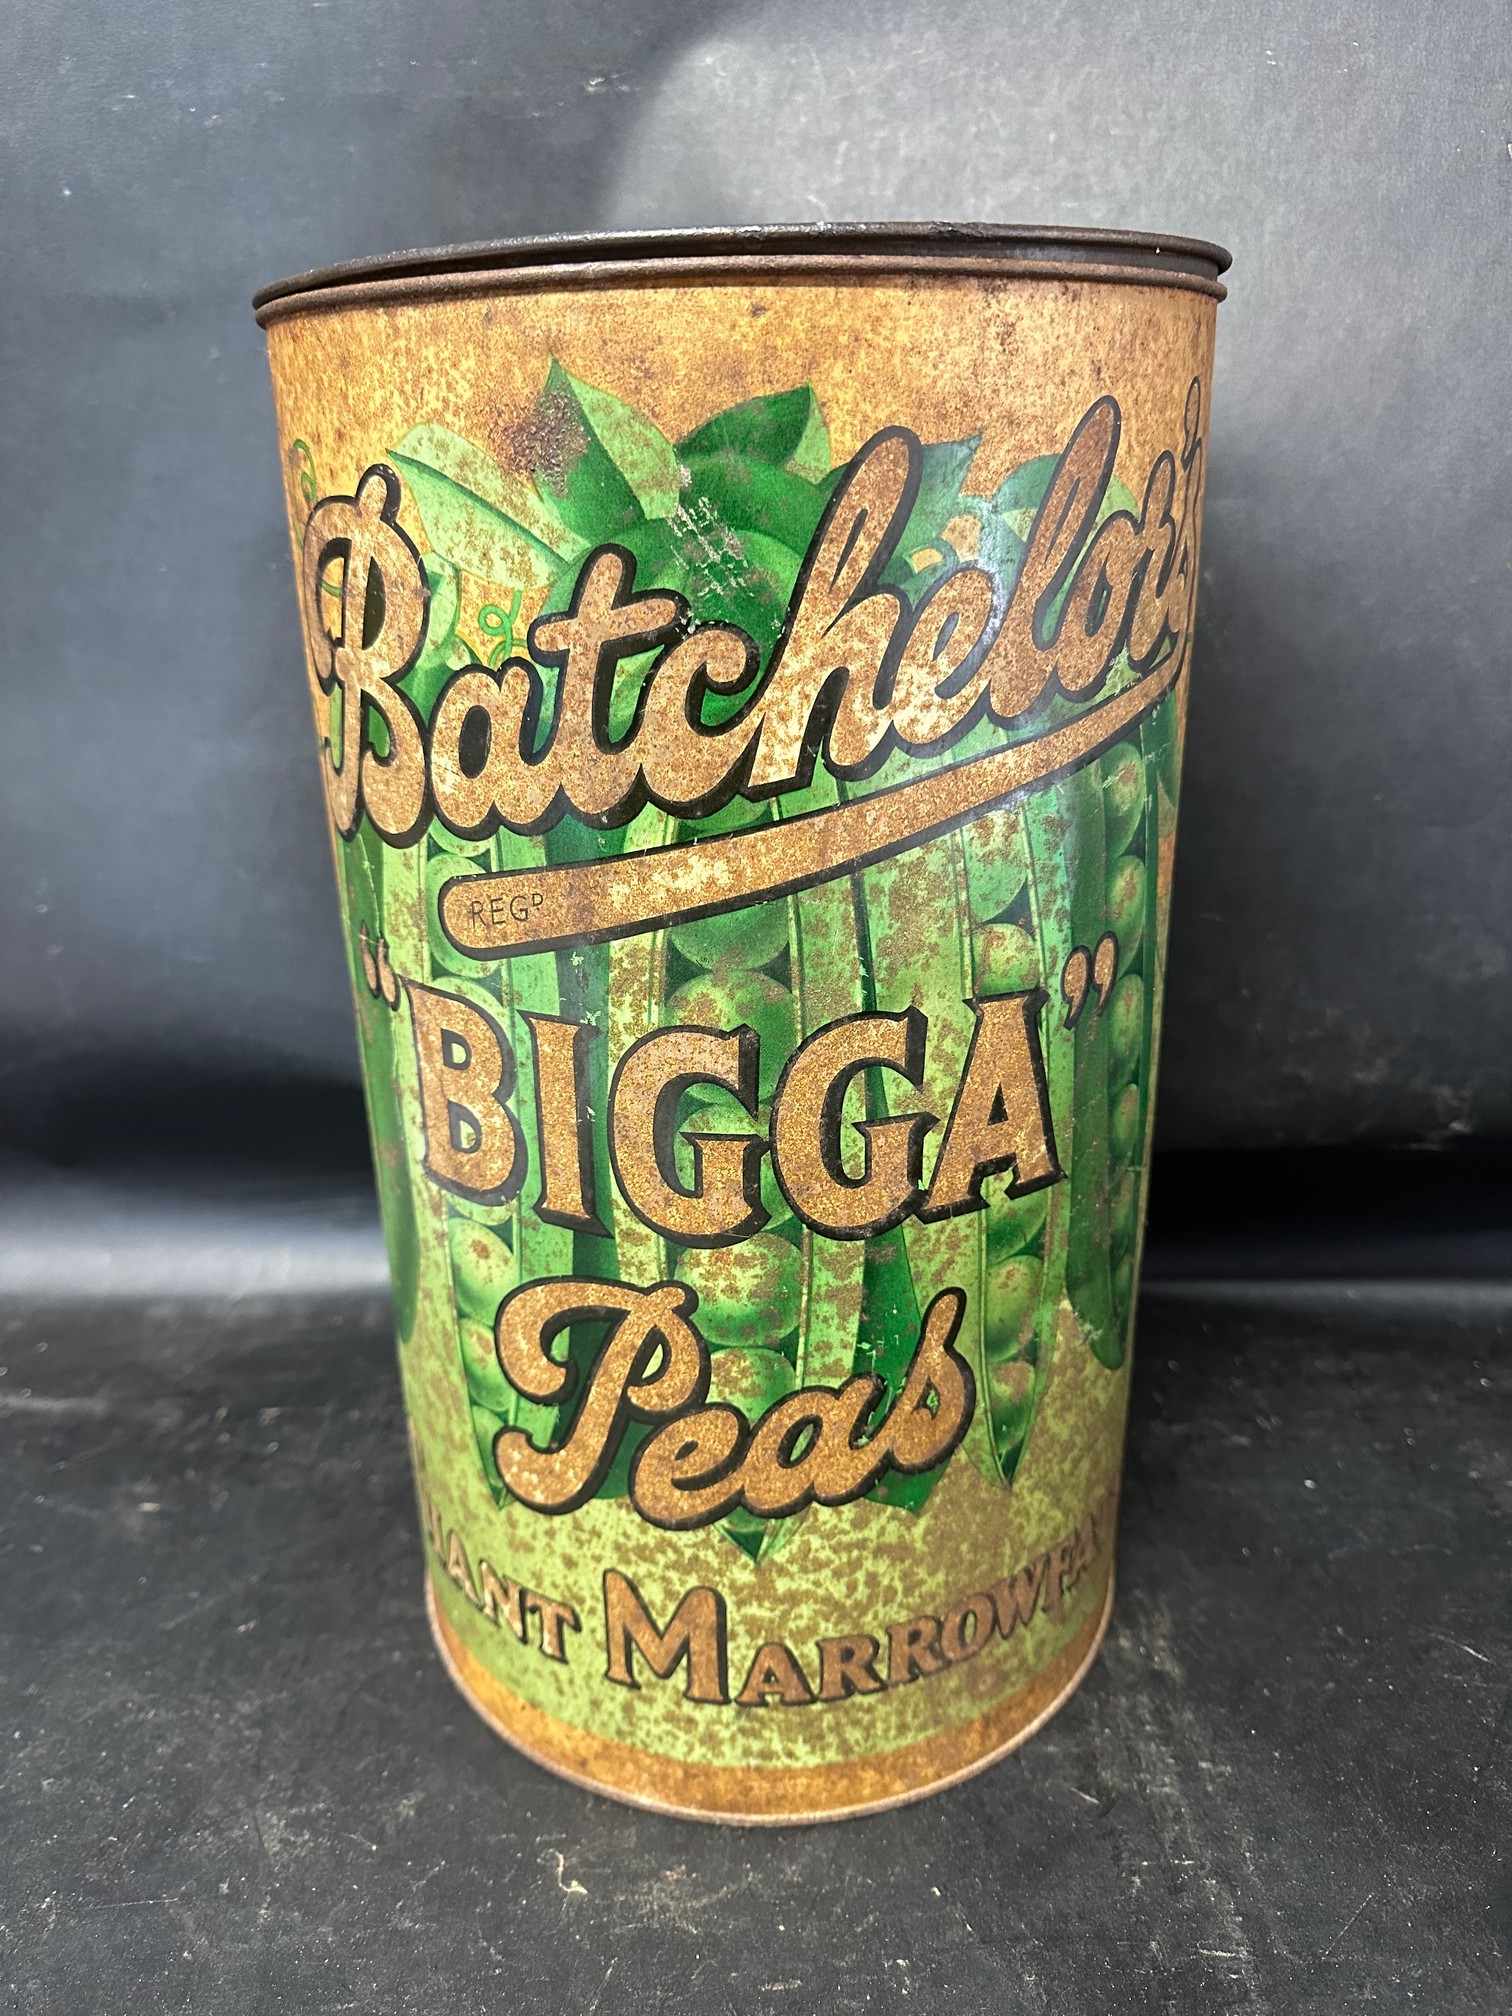 A large Batchelor's "Biggs" Peas Giant Marrowfats advertising display can, 14 1/4" tall.